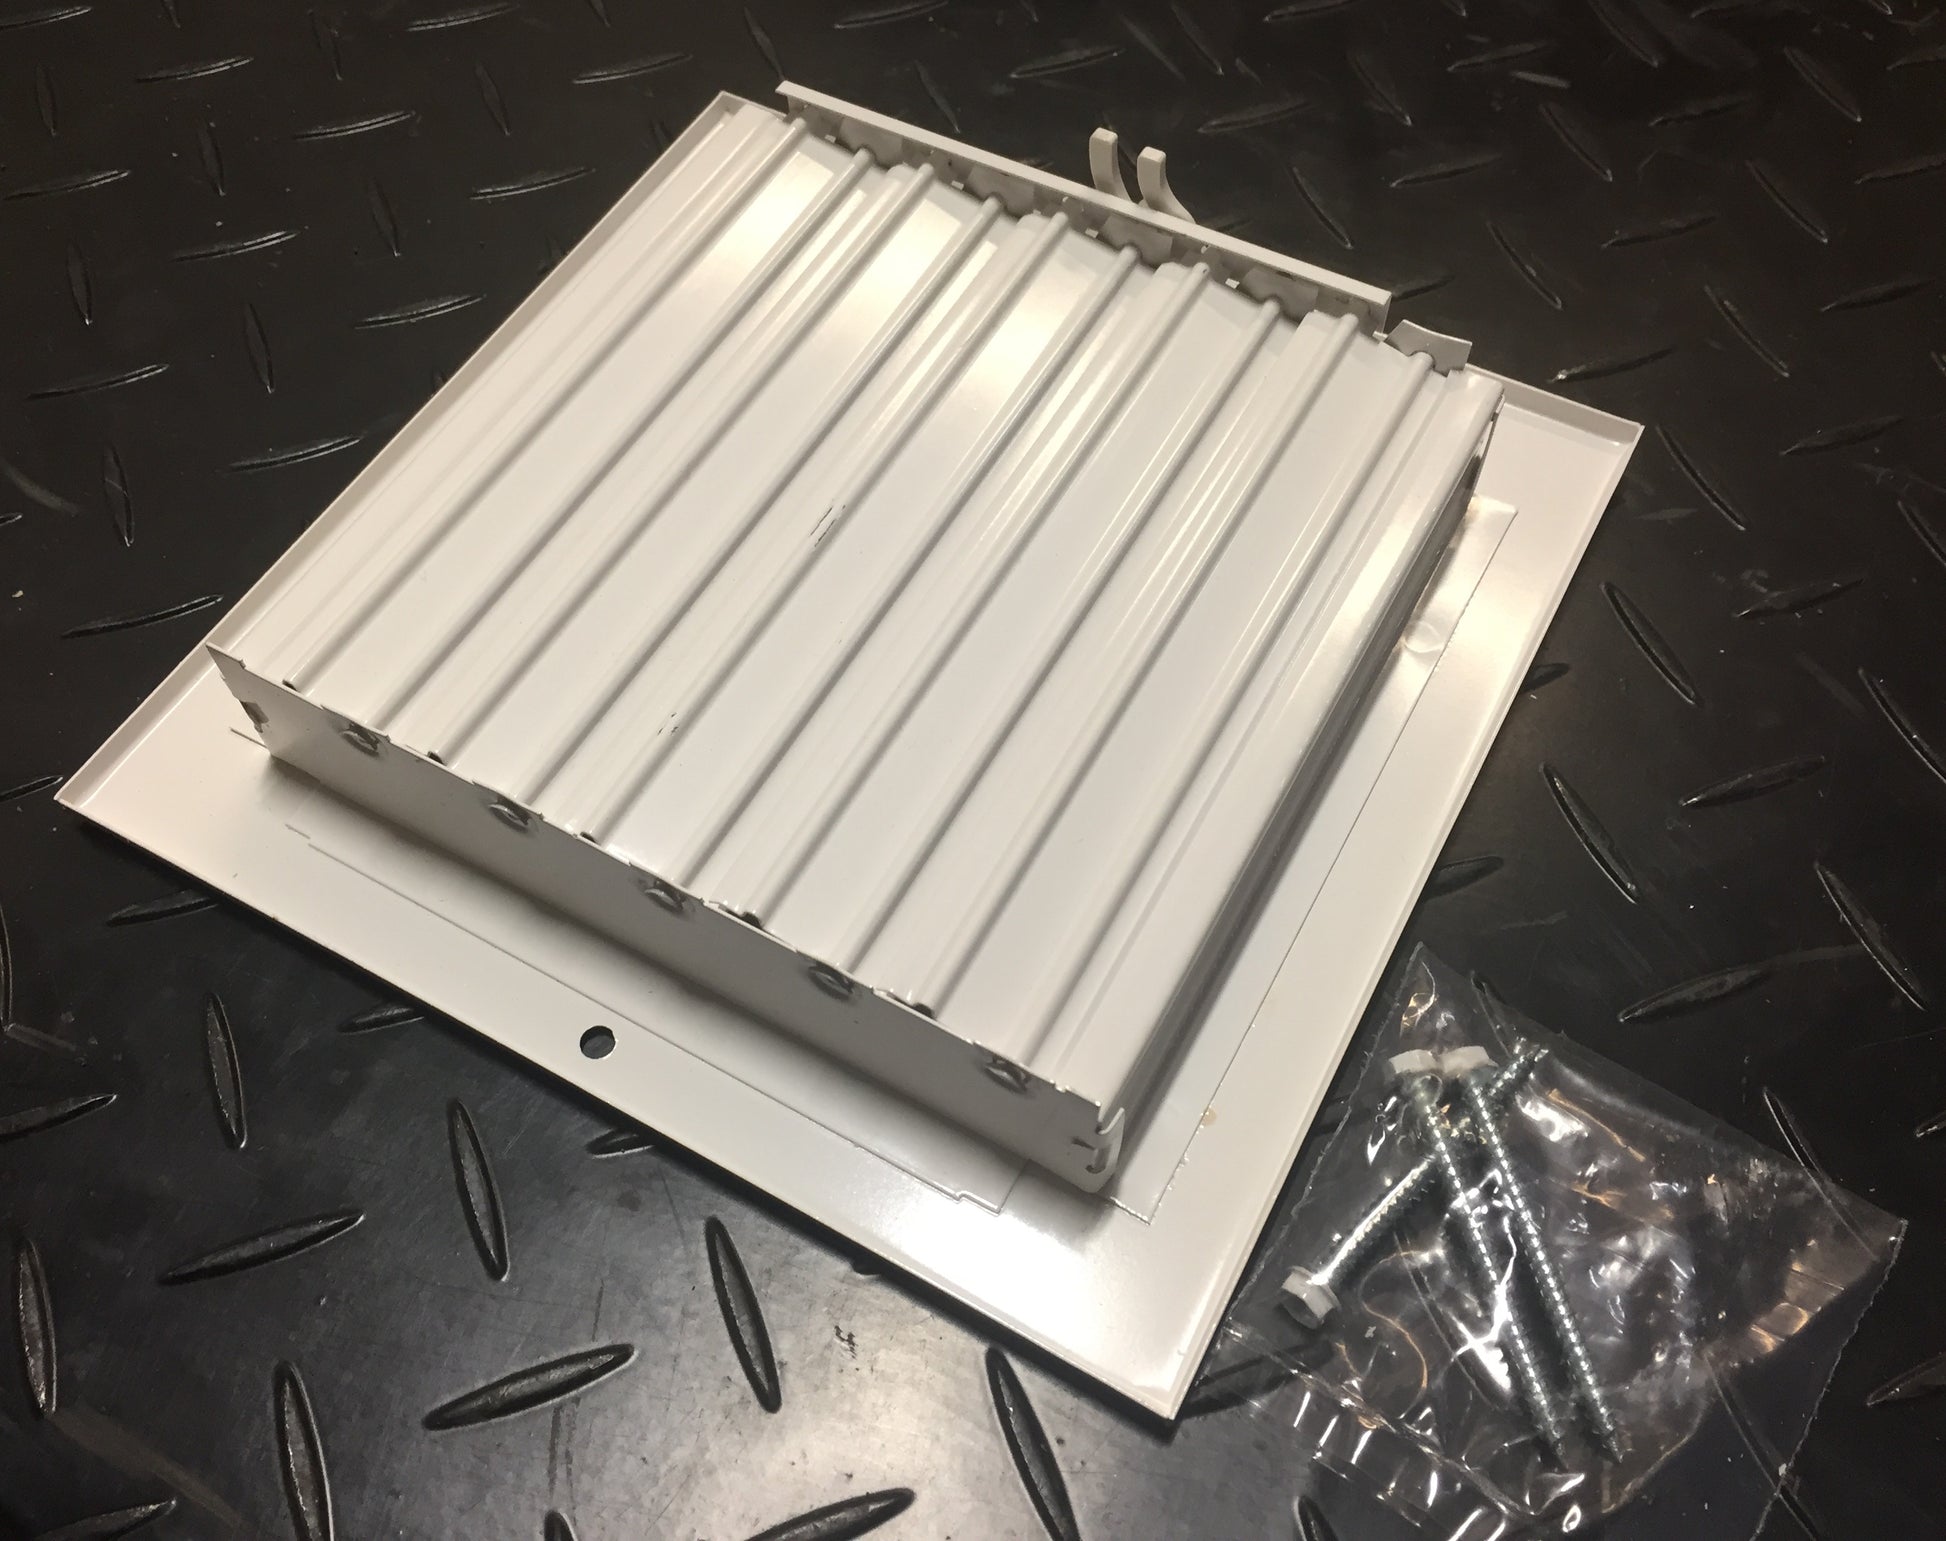 6" X 6" SINGLE DEFLECTION SUPPLY REGISTER WITH MULTI-LOUVER DAMPER